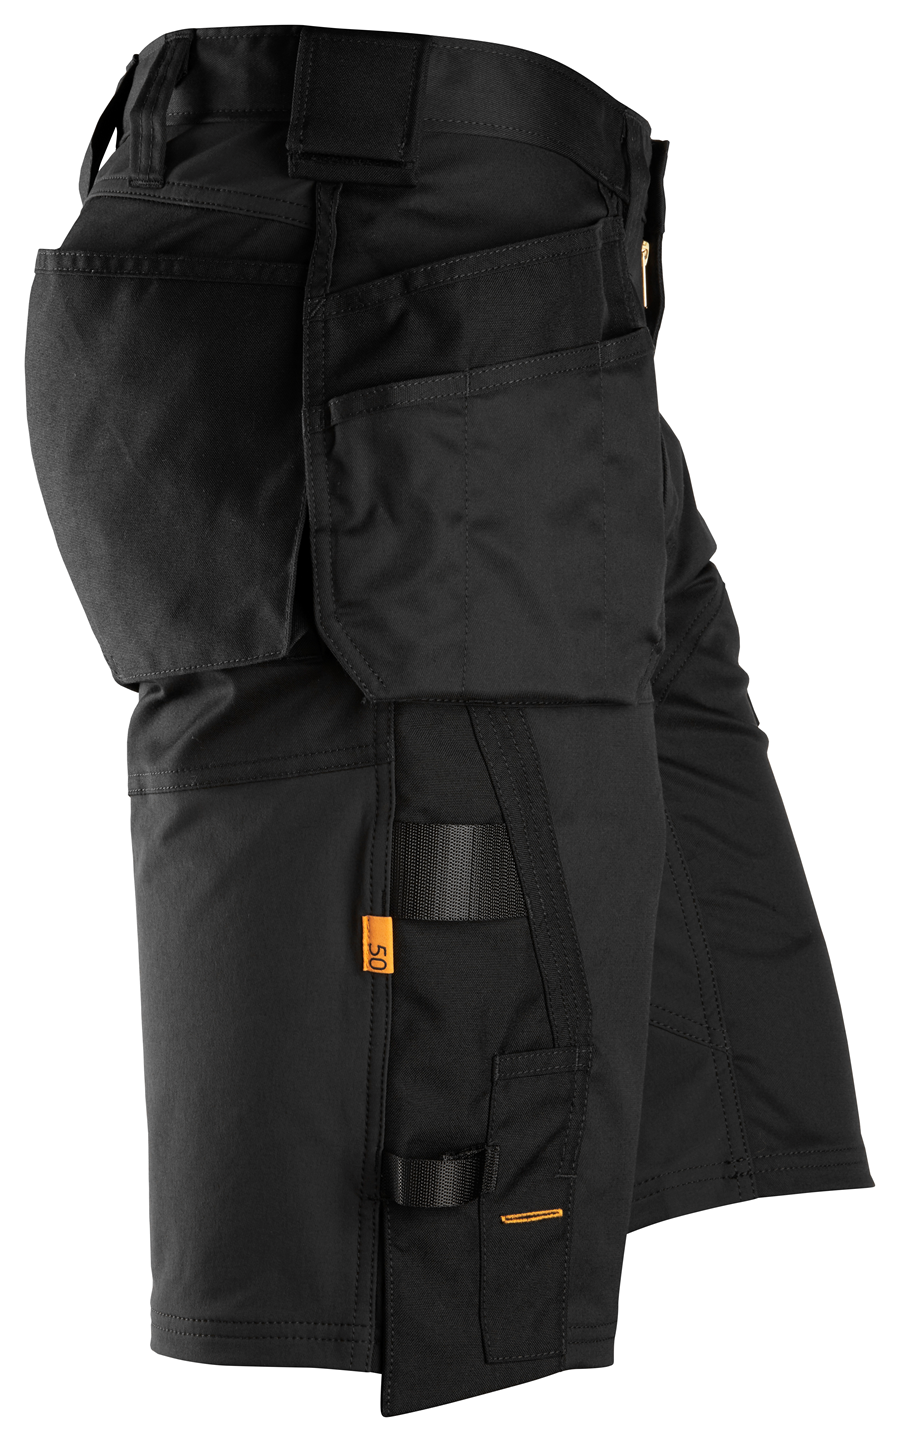 Shorts Fit PPE Pockets | Holster 6151 Centre - | Snickers AllroundWork, Z Uniforms Safety Loose A Work Stretch to